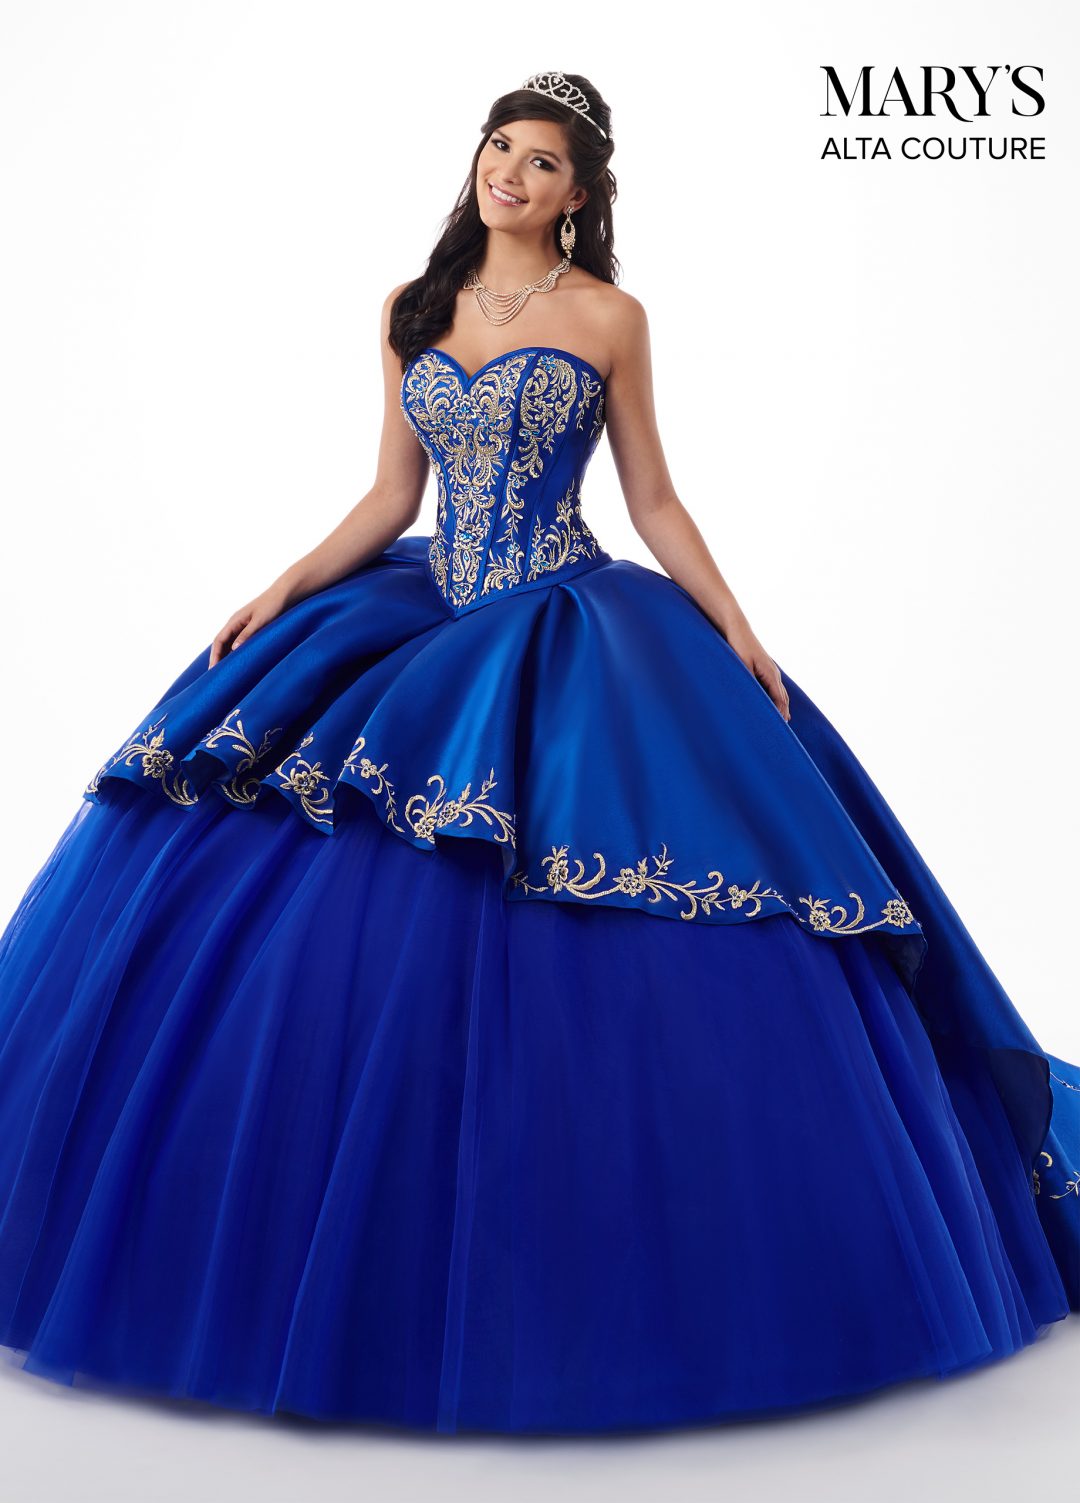 Embroidered Charro Two-Piece Quinceanera Dress - Toledoz Boutique